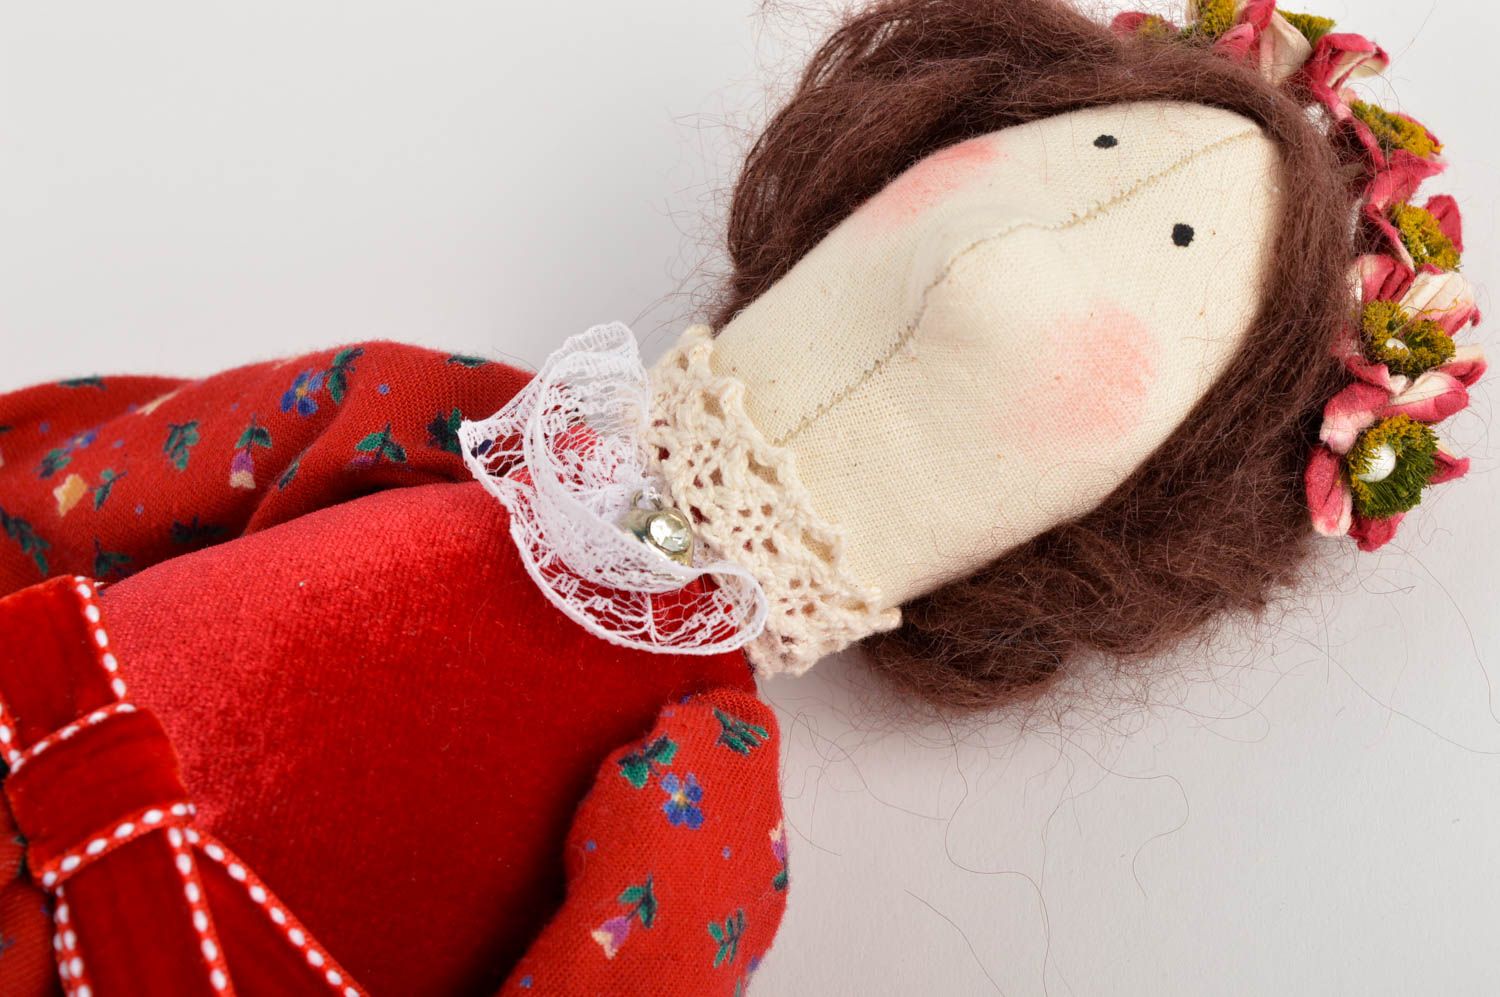 Handmade doll in red dress stuffed toy designer childrens toy decoration ideas photo 4